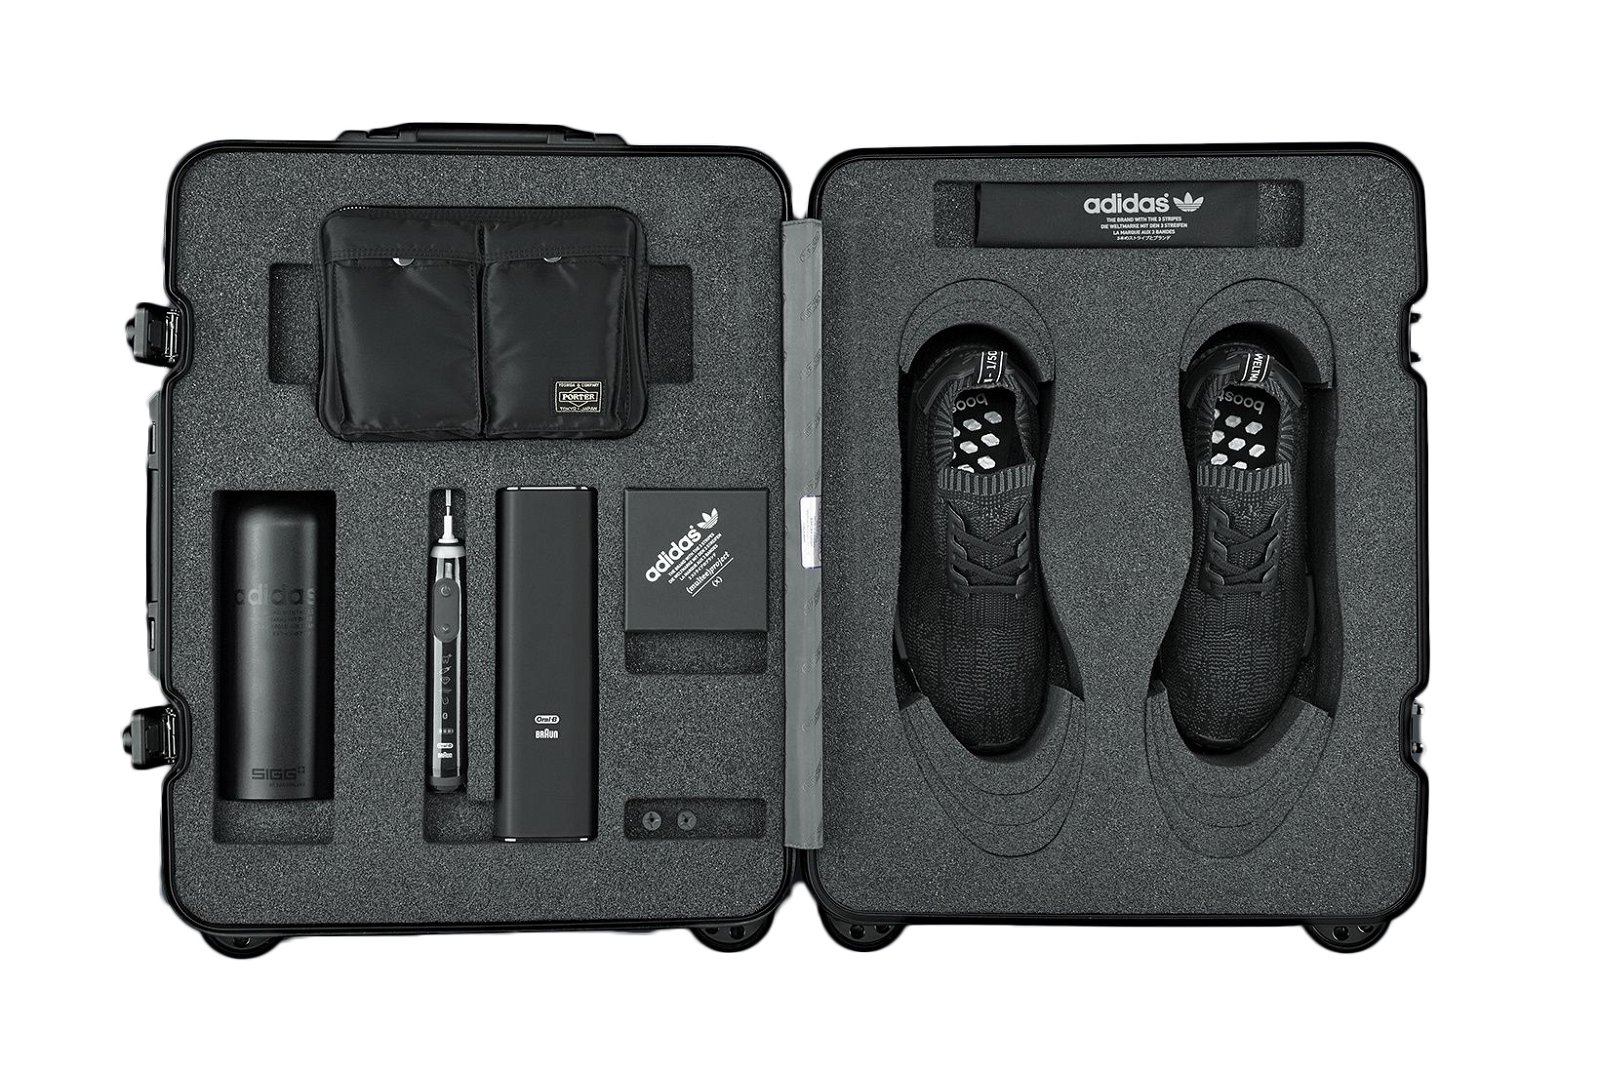 adidas NMD R1 Friends and Family Pitch Black (Rimowa Set W/ Accessories) sneaker informations